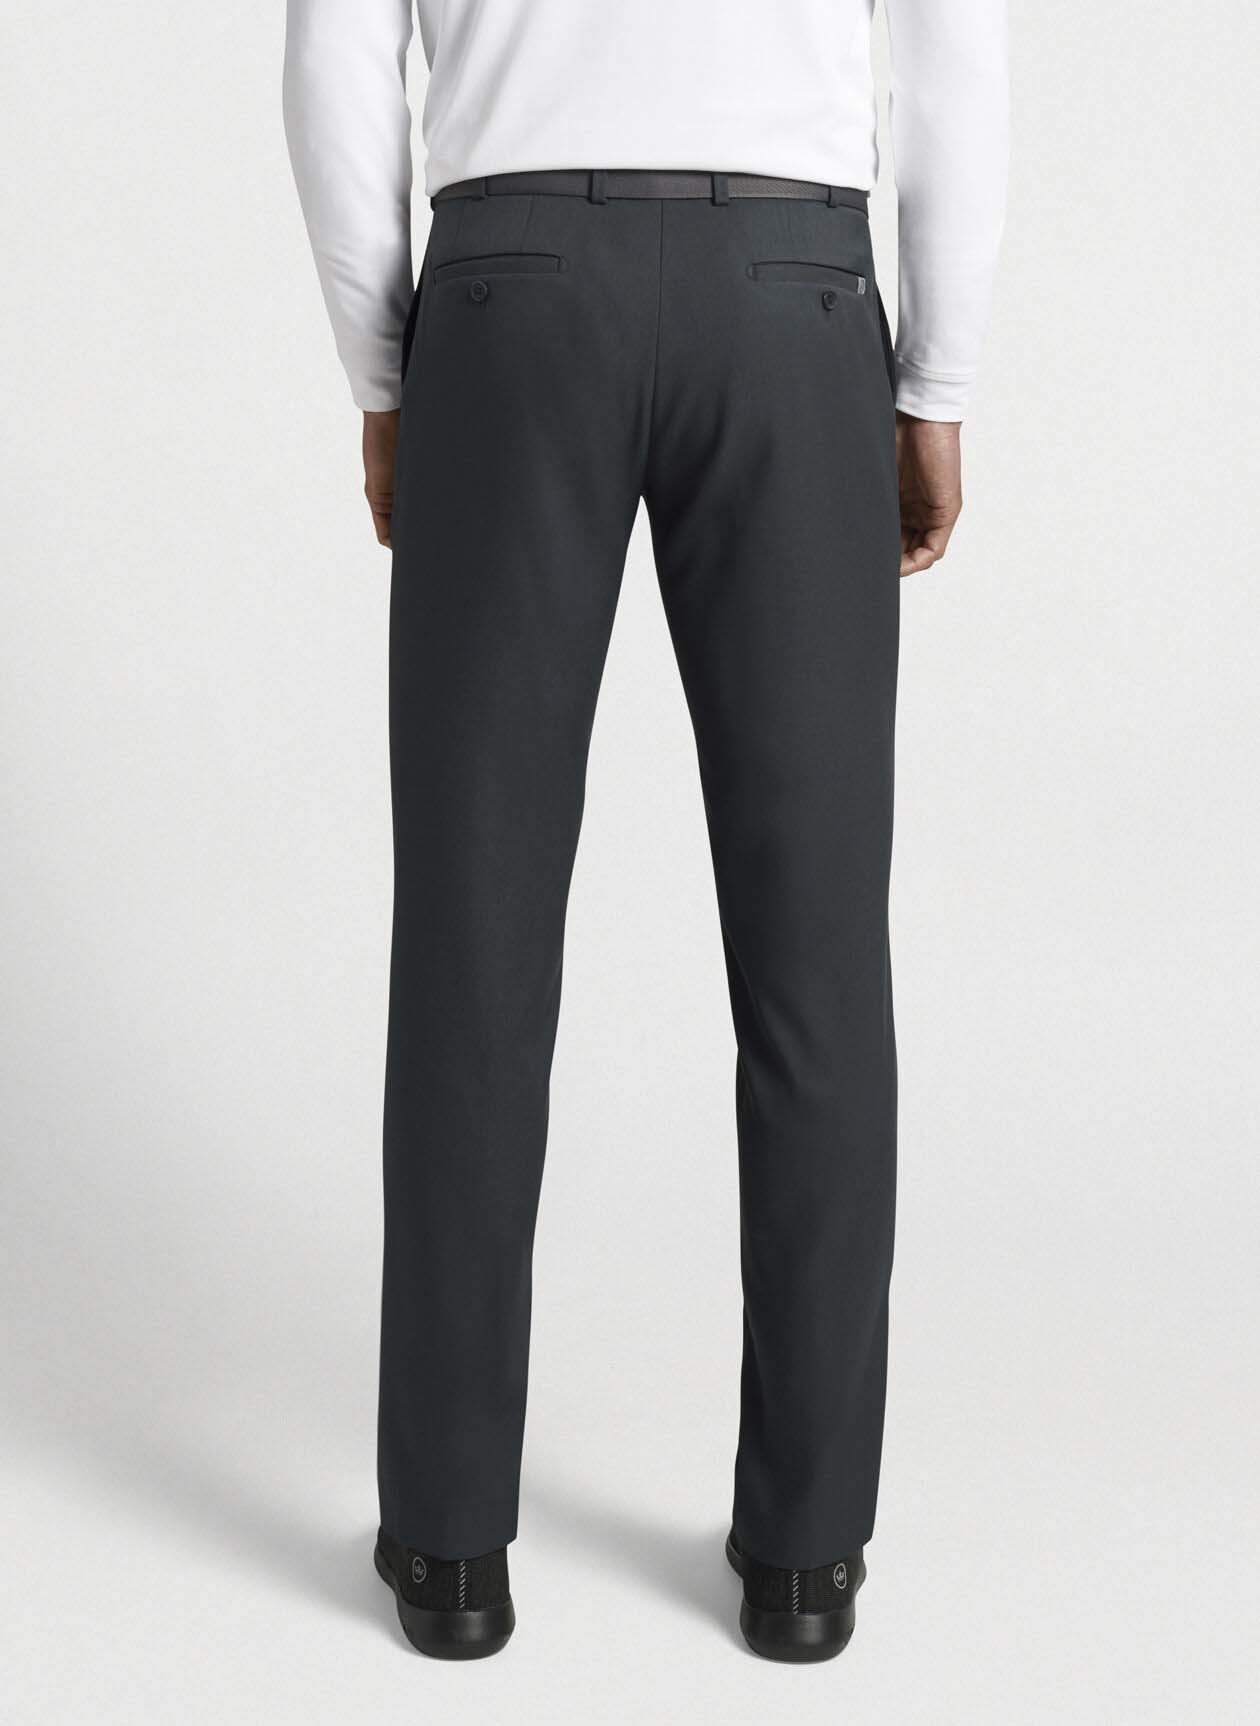 FRANKLIN PERFORMANCE TROUSER - CHARCOAL